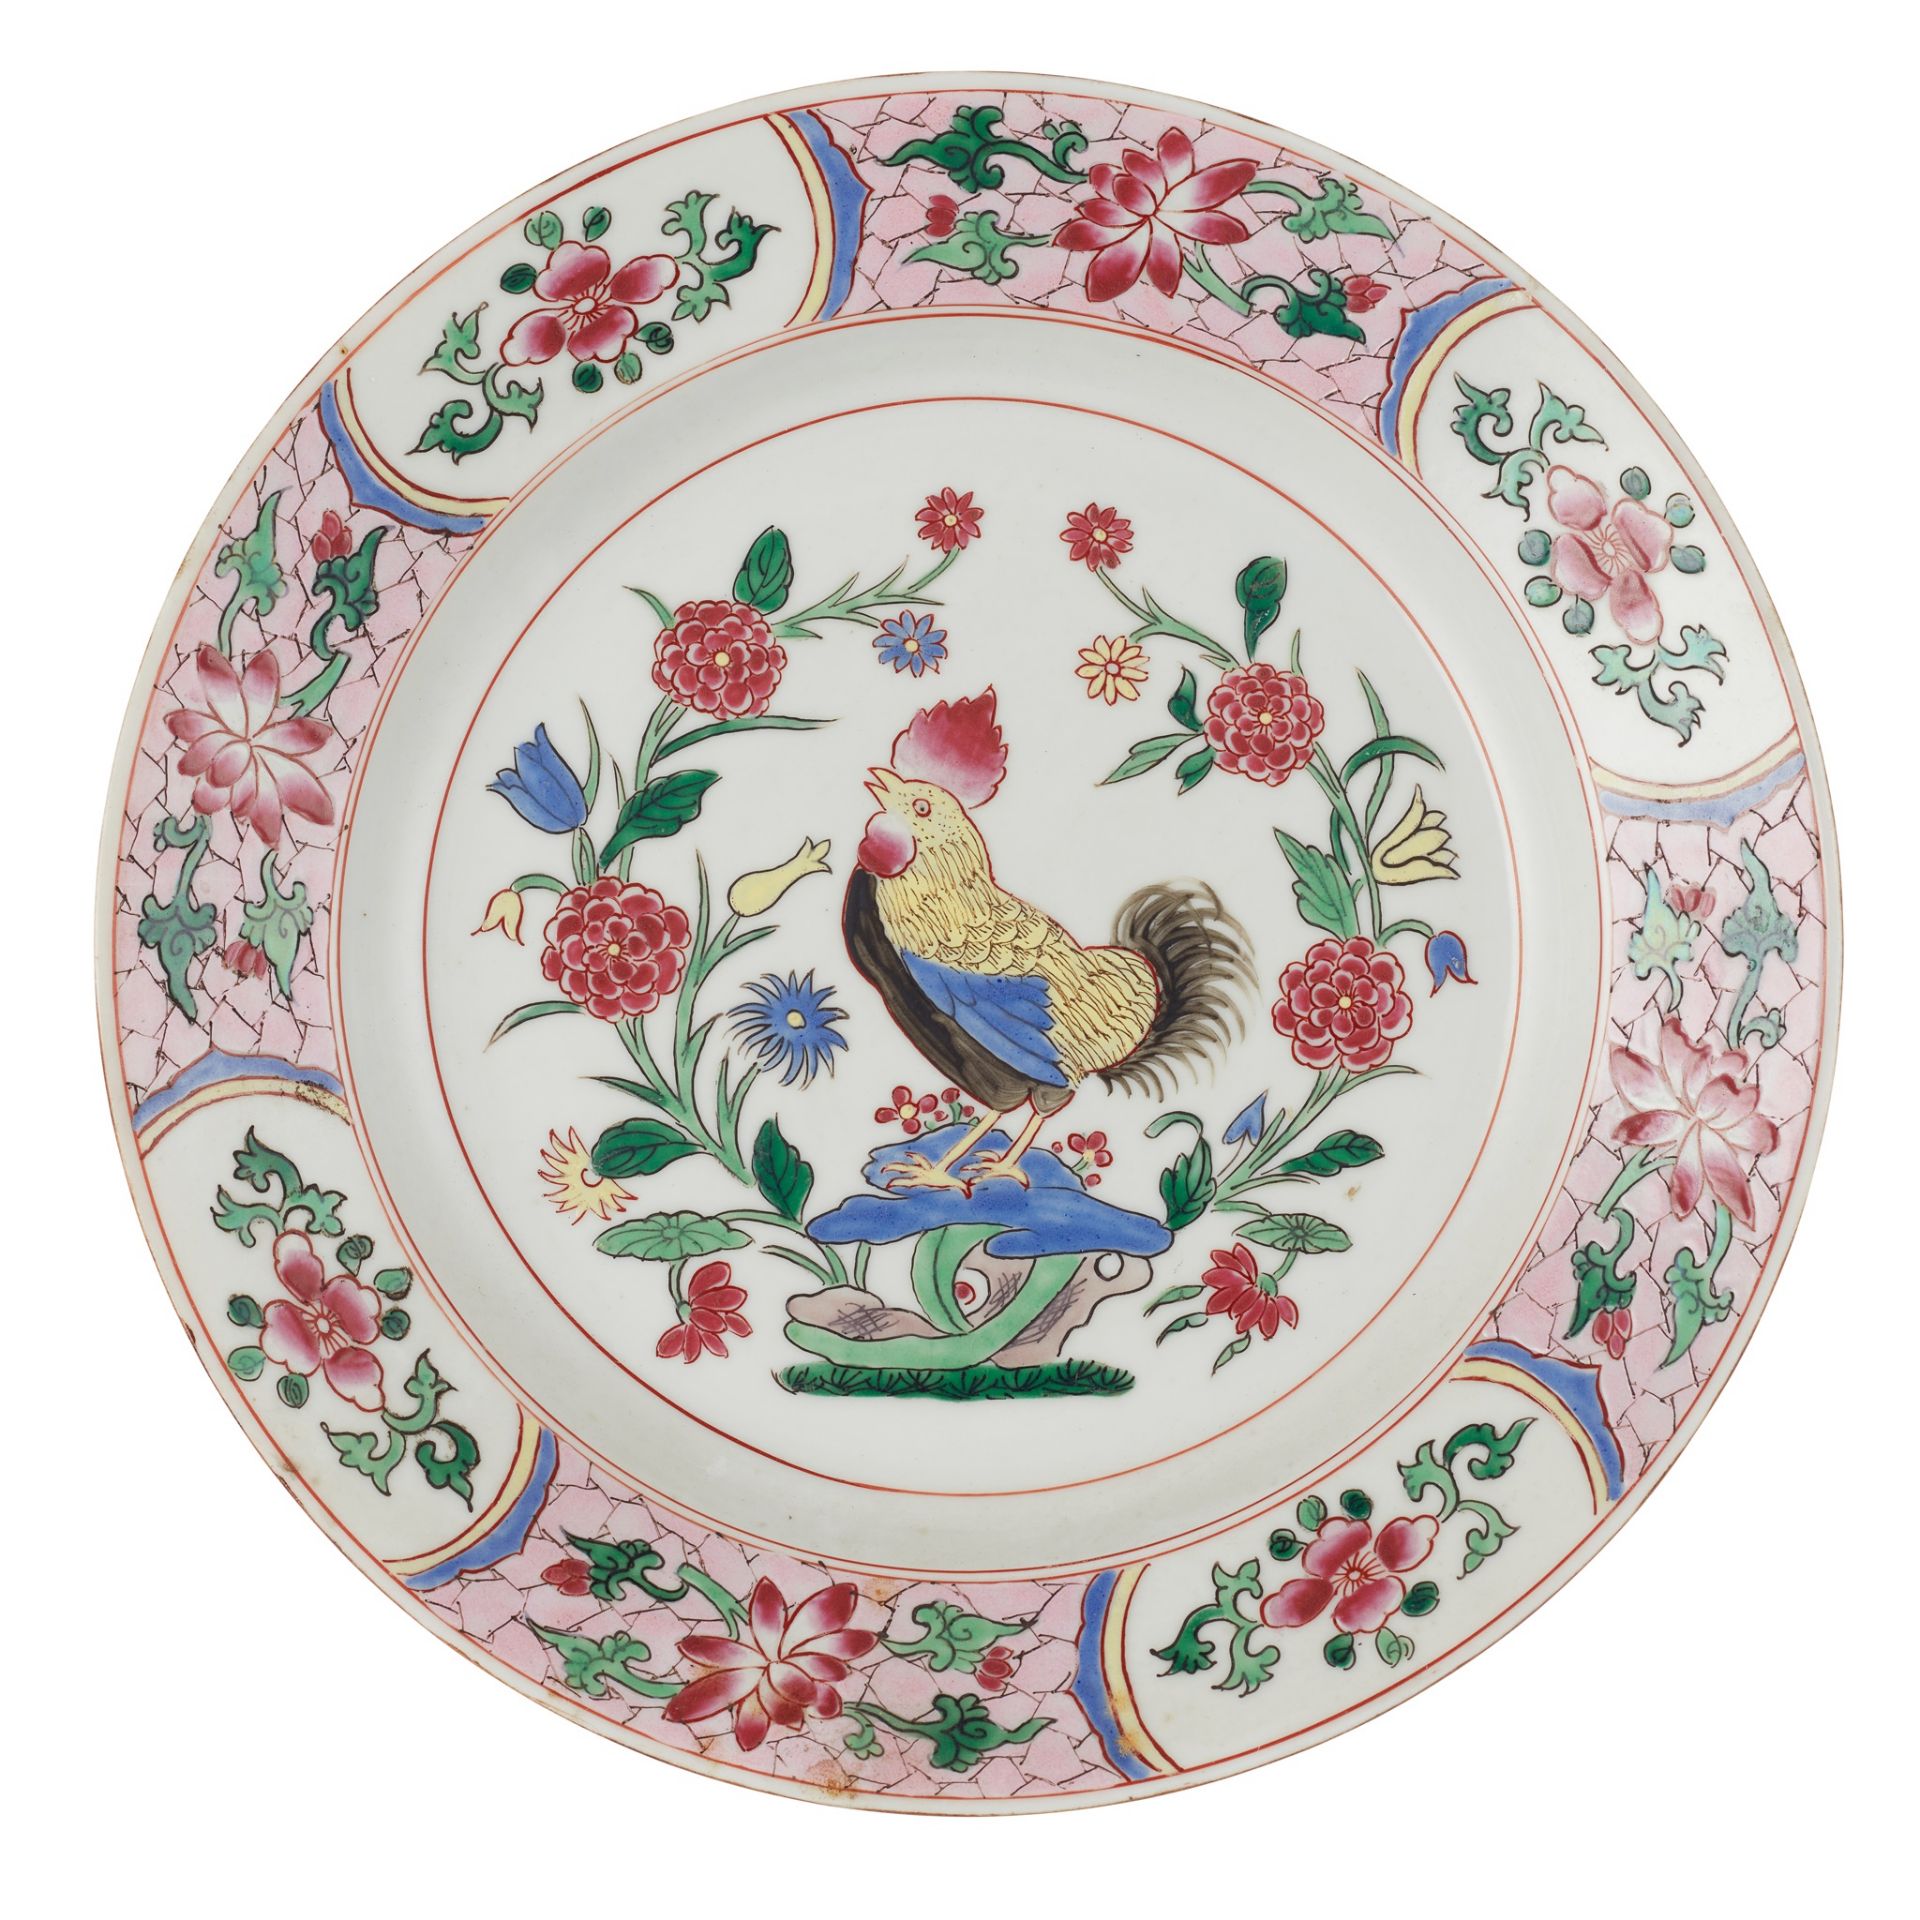 GROUP OF SIX FAMILLE ROSE PLATES QING DYNASTY, 18TH CENTURY - Image 2 of 3